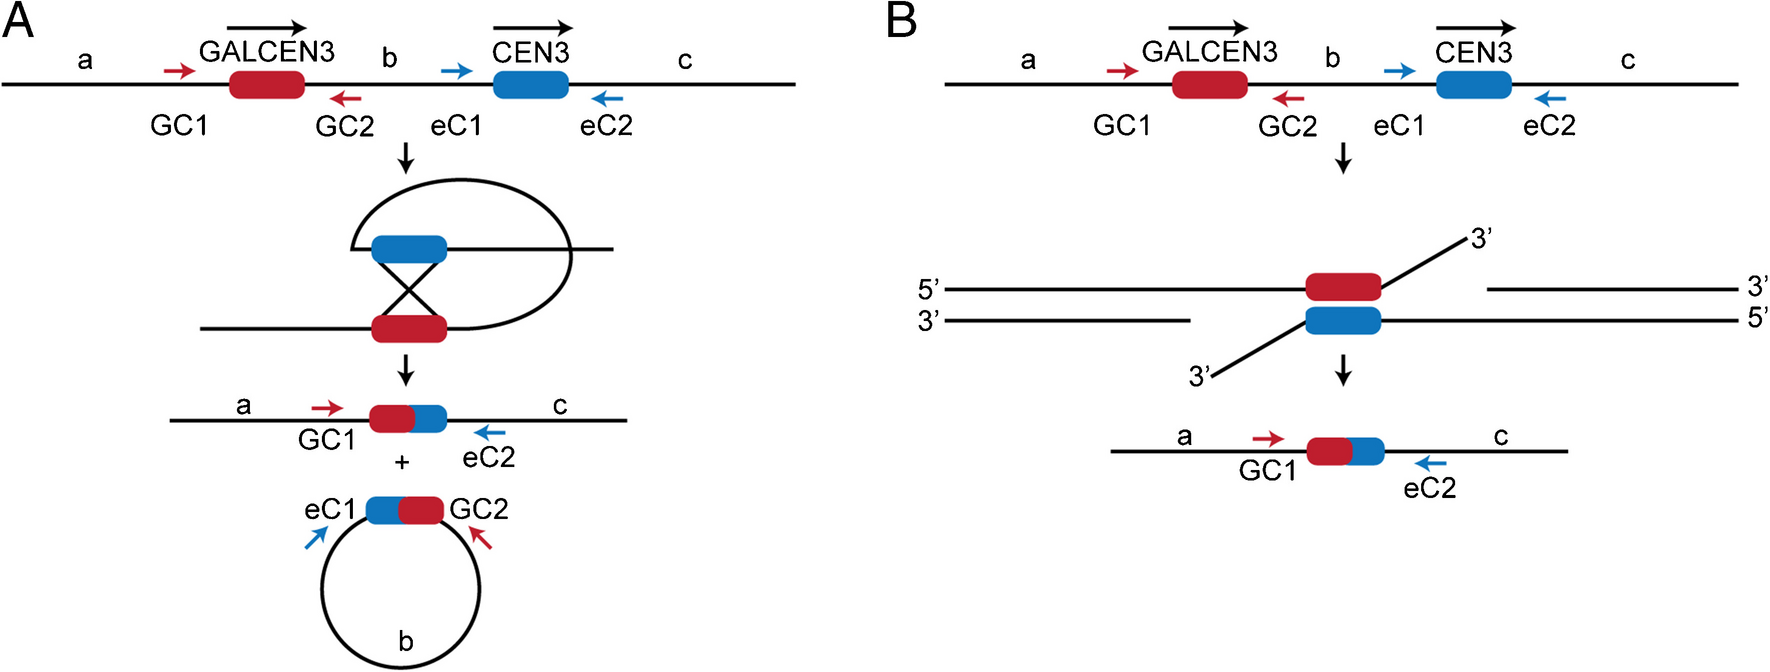 Dicentric chromosomes are resolved through breakage and repair at their centromeres